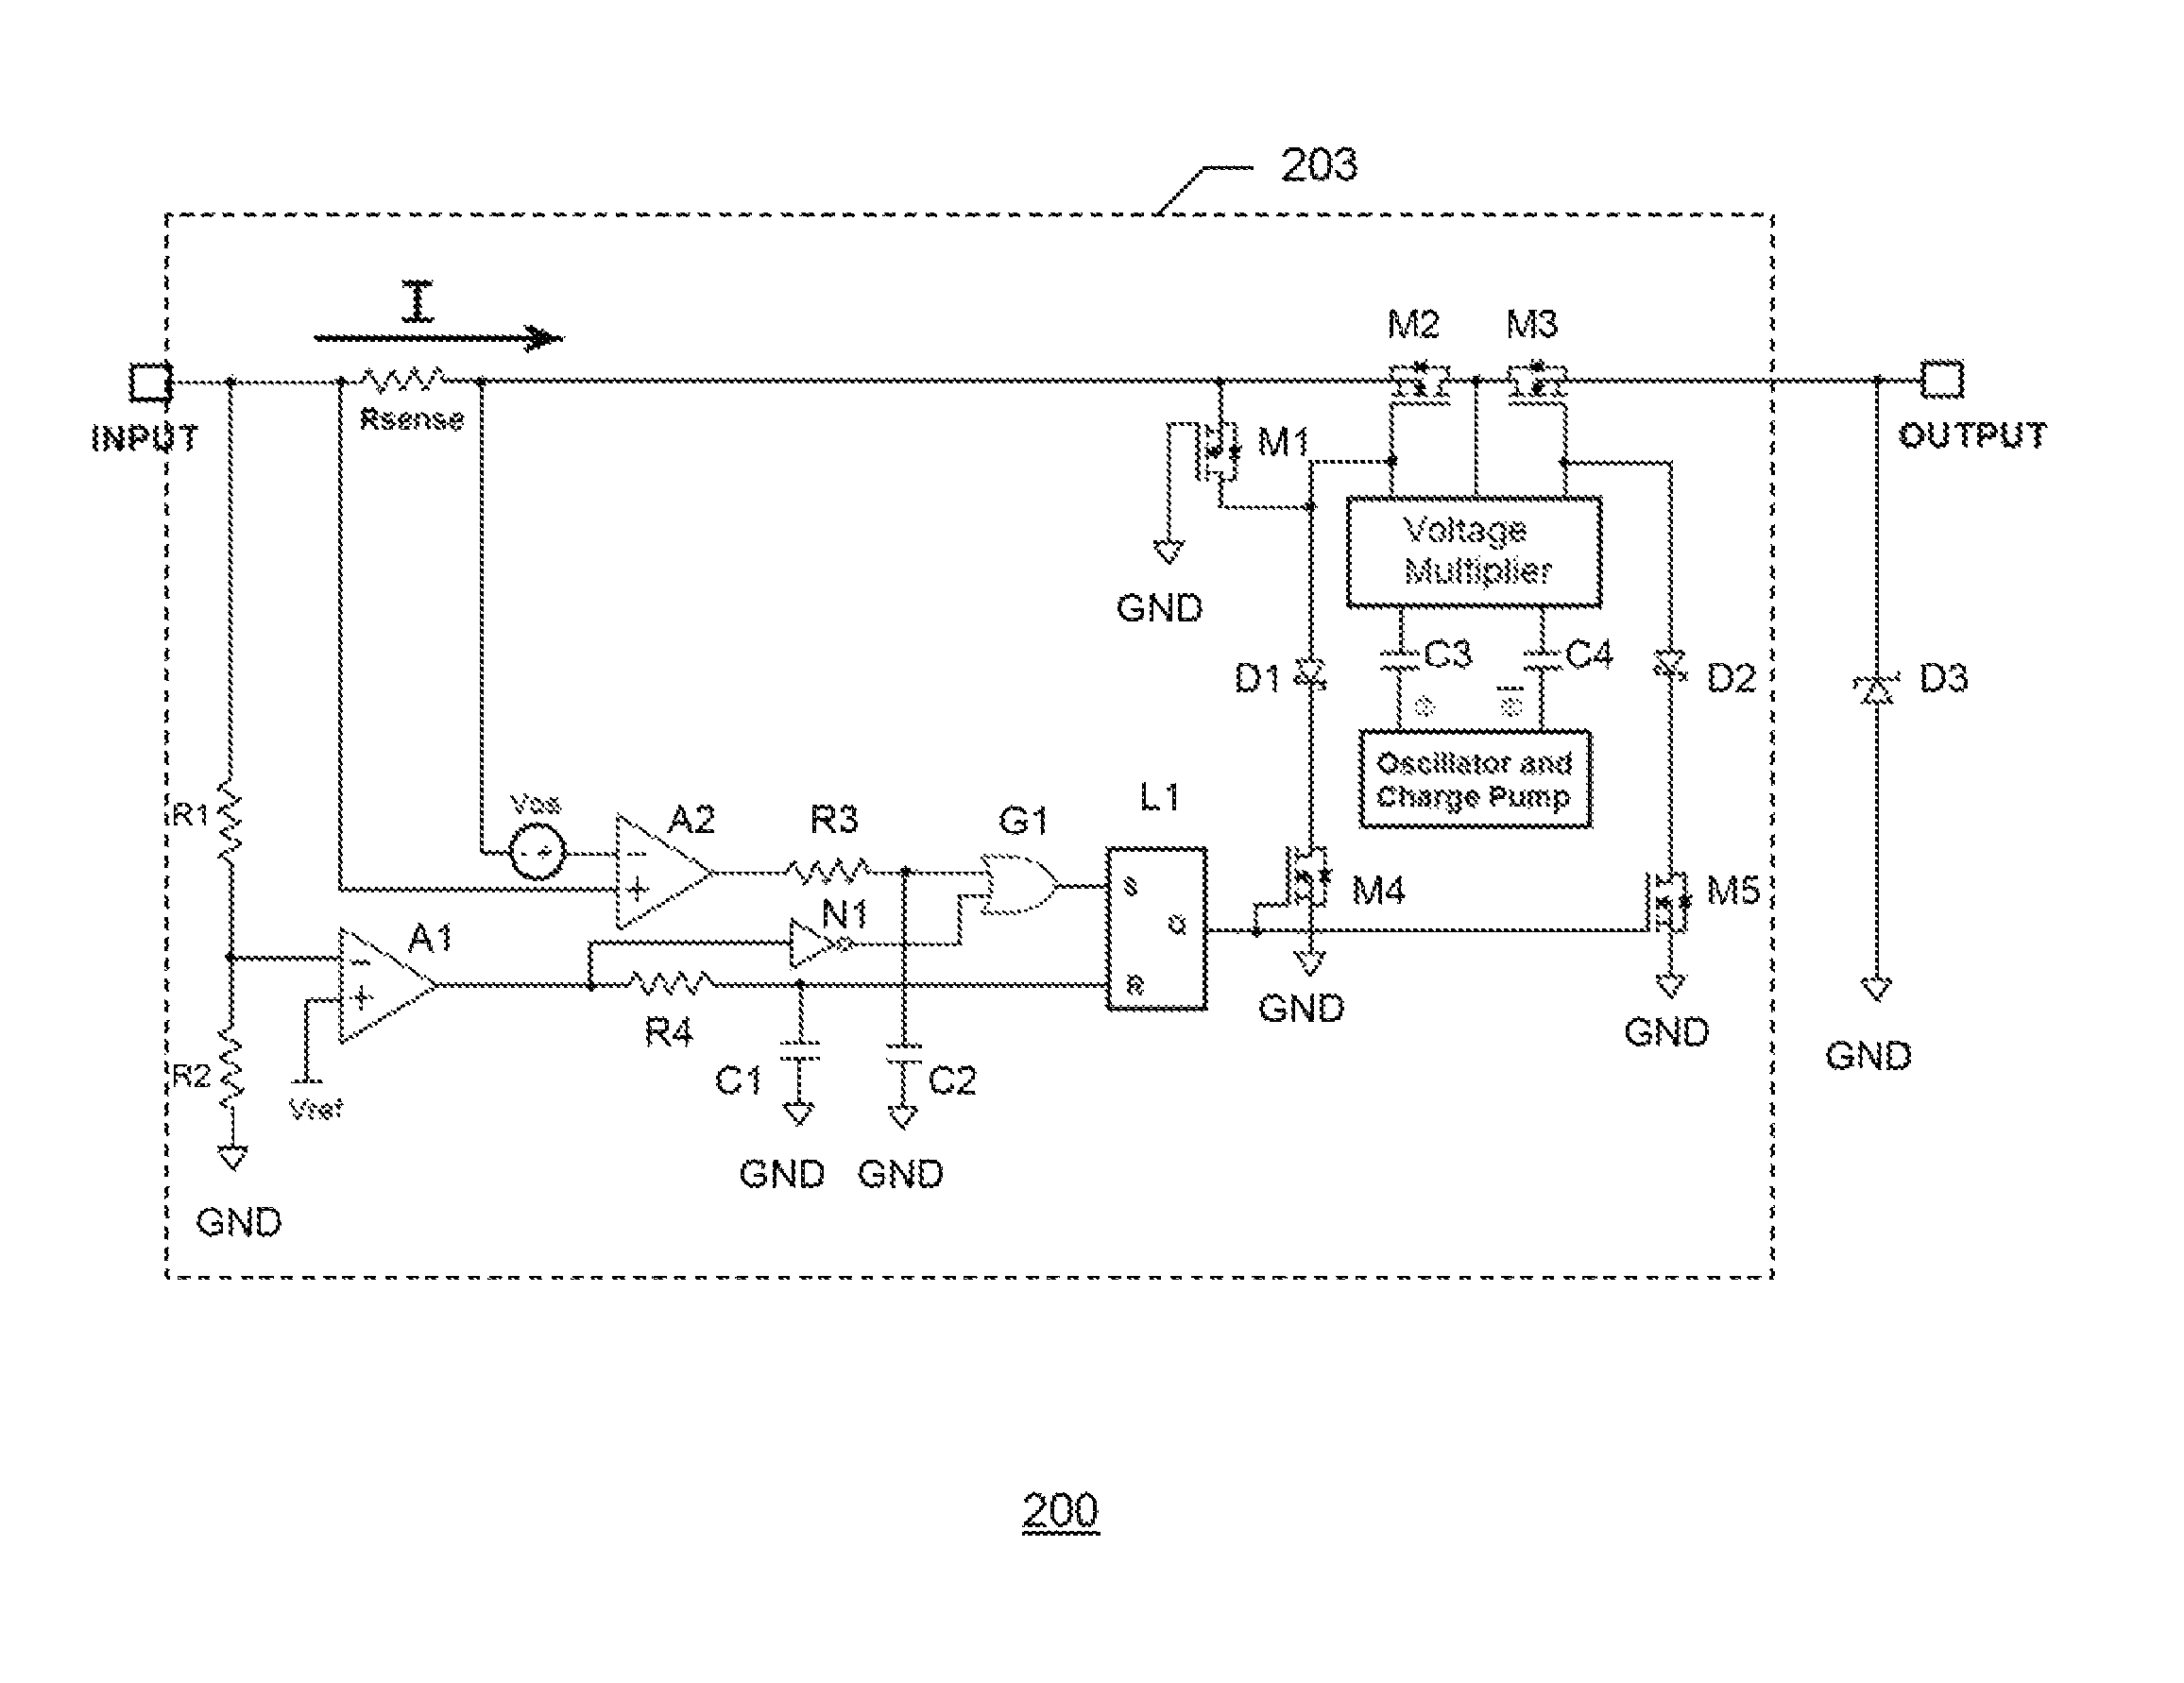 System and method for fast-acting power protection